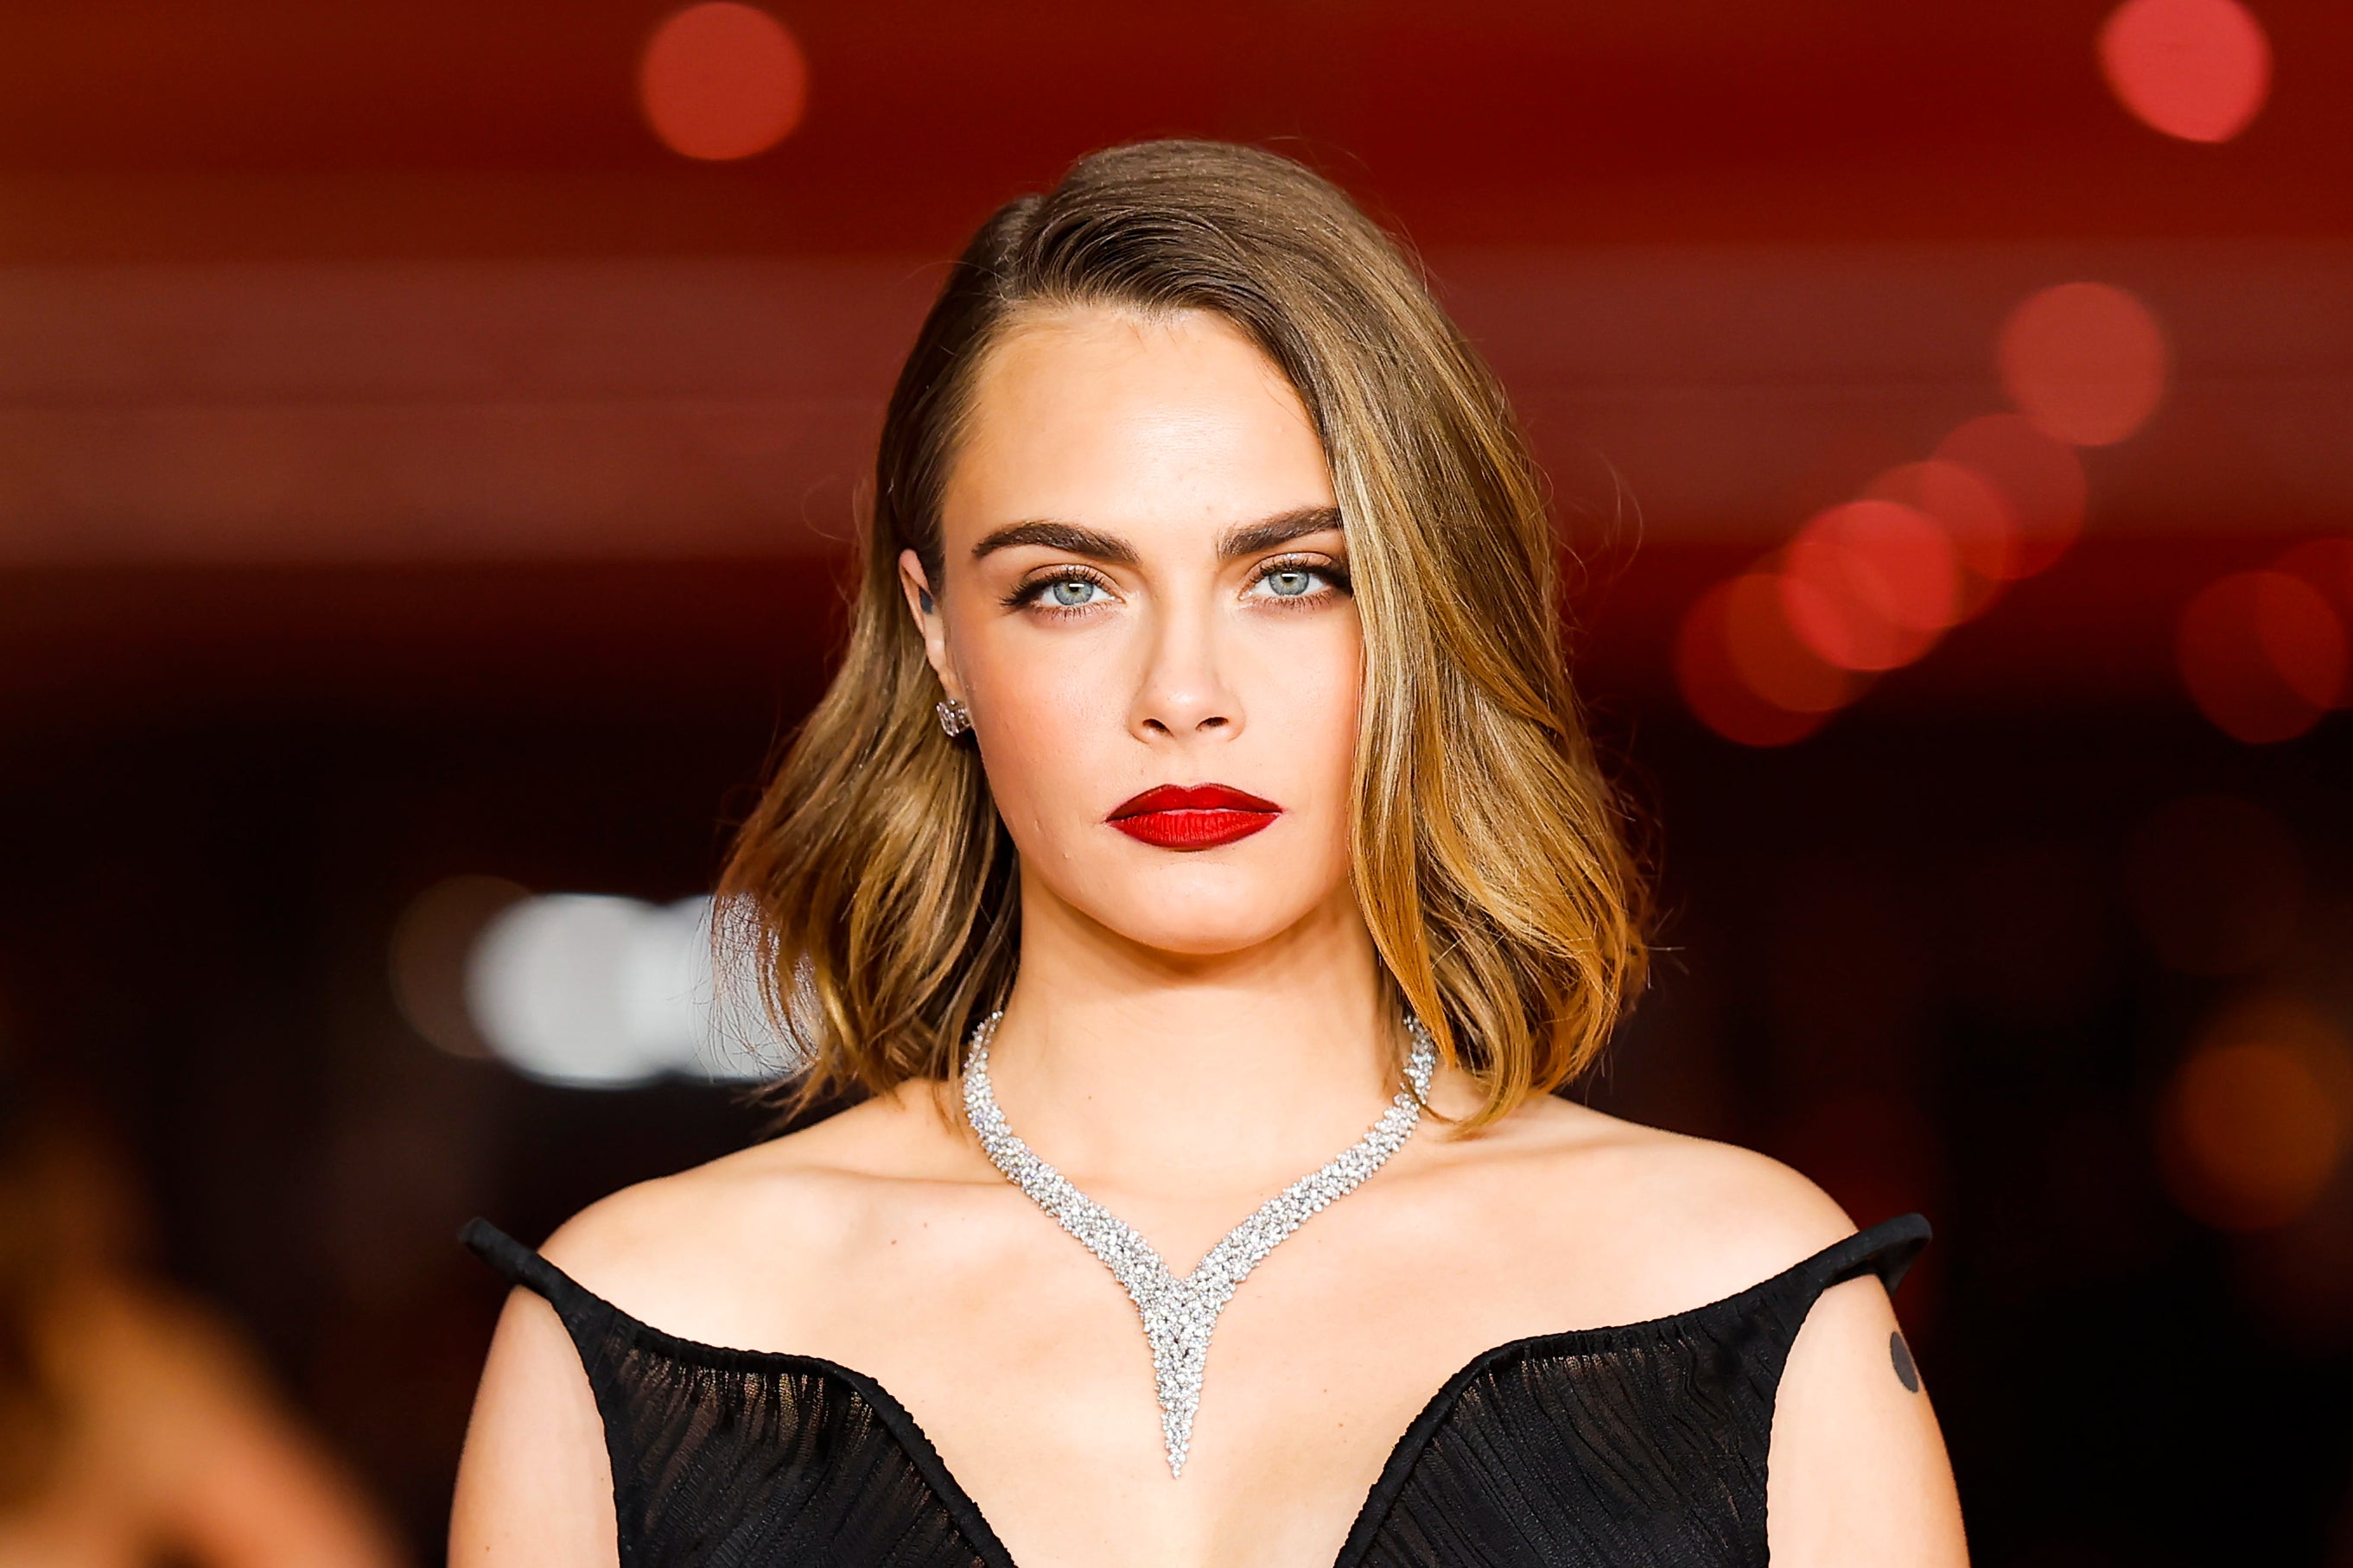 Cara Delevingne's Los Angeles home destroyed in fire | The Independent